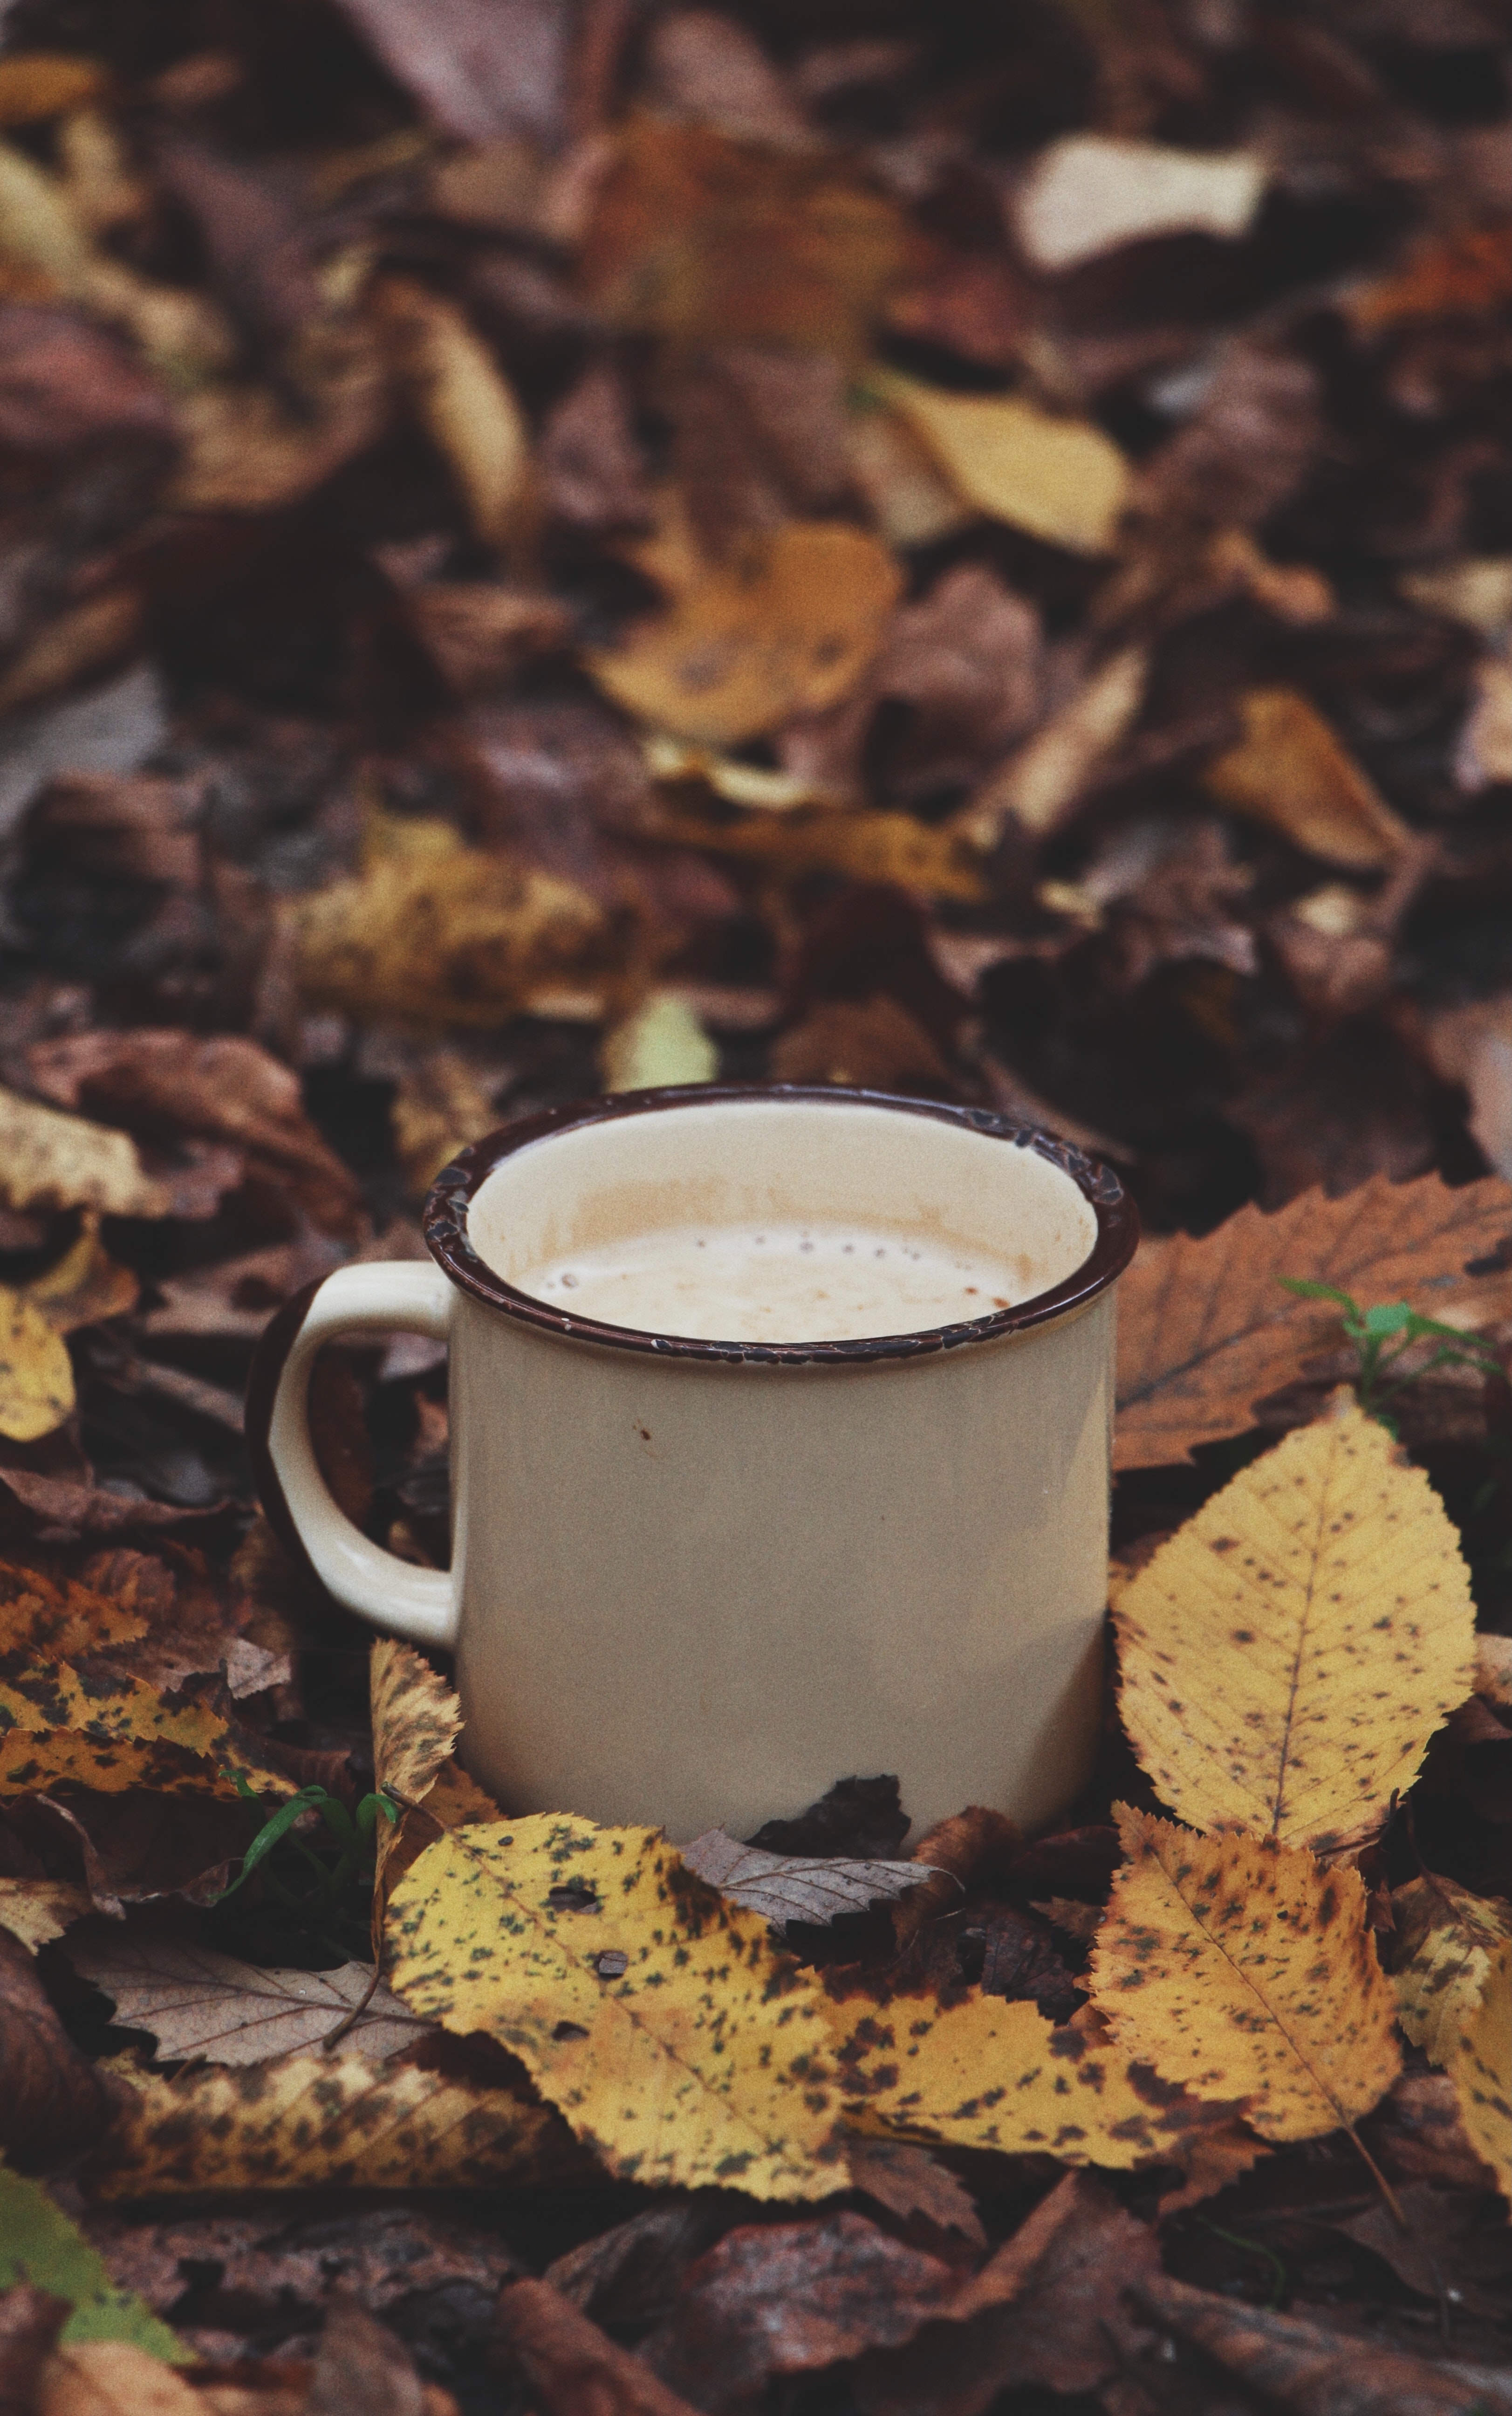 New Lock Screen Wallpapers leaves, coffee, miscellanea, miscellaneous, cup, drink, beverage, mug